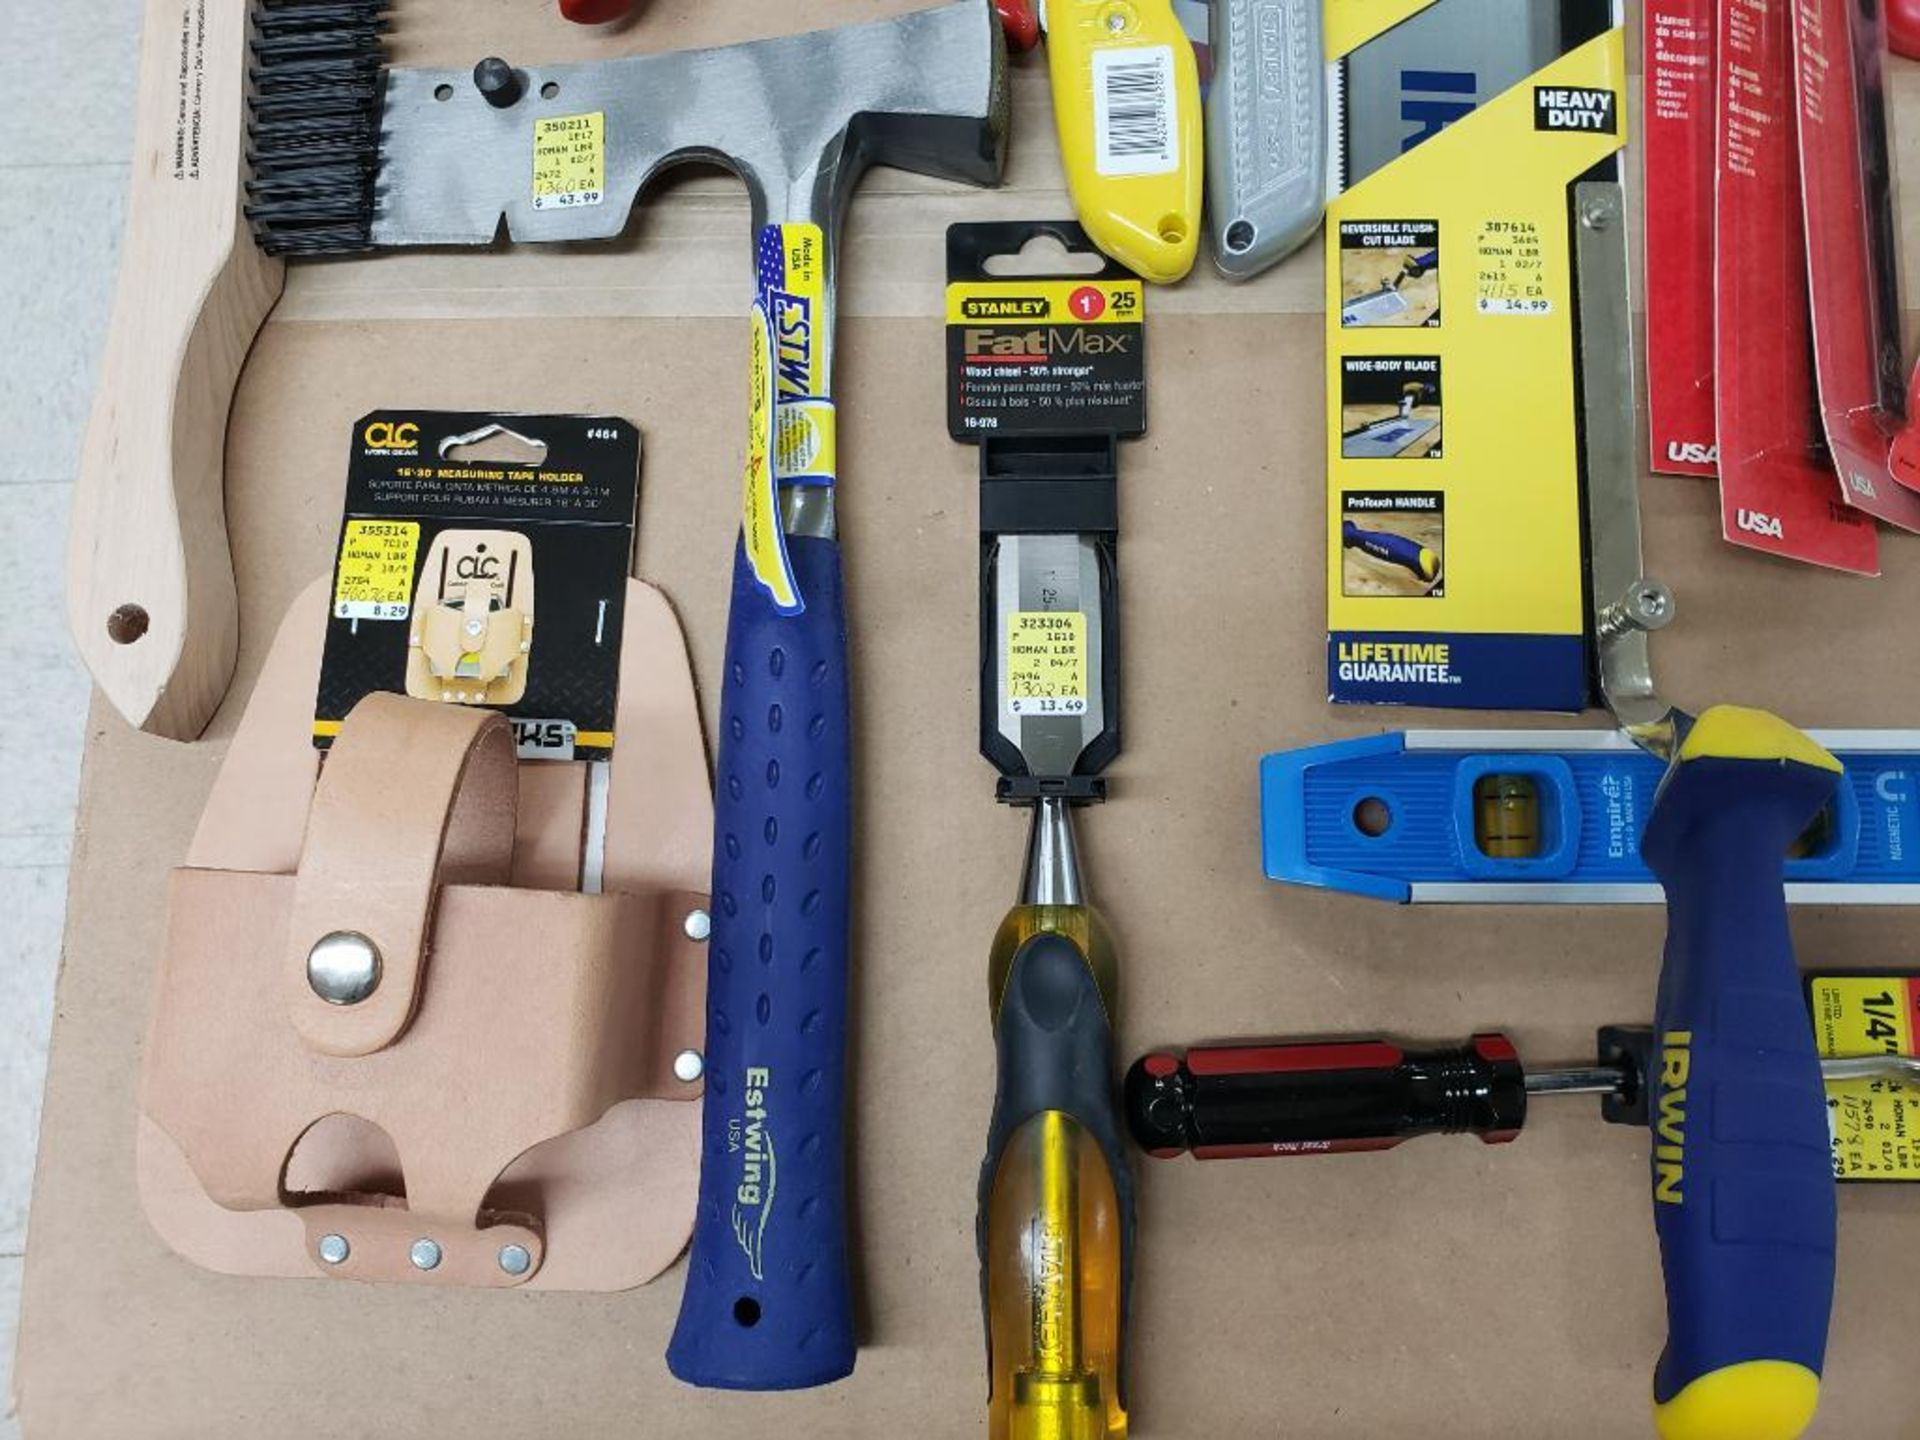 Large assortment of tools. New as pictured. - Image 10 of 12